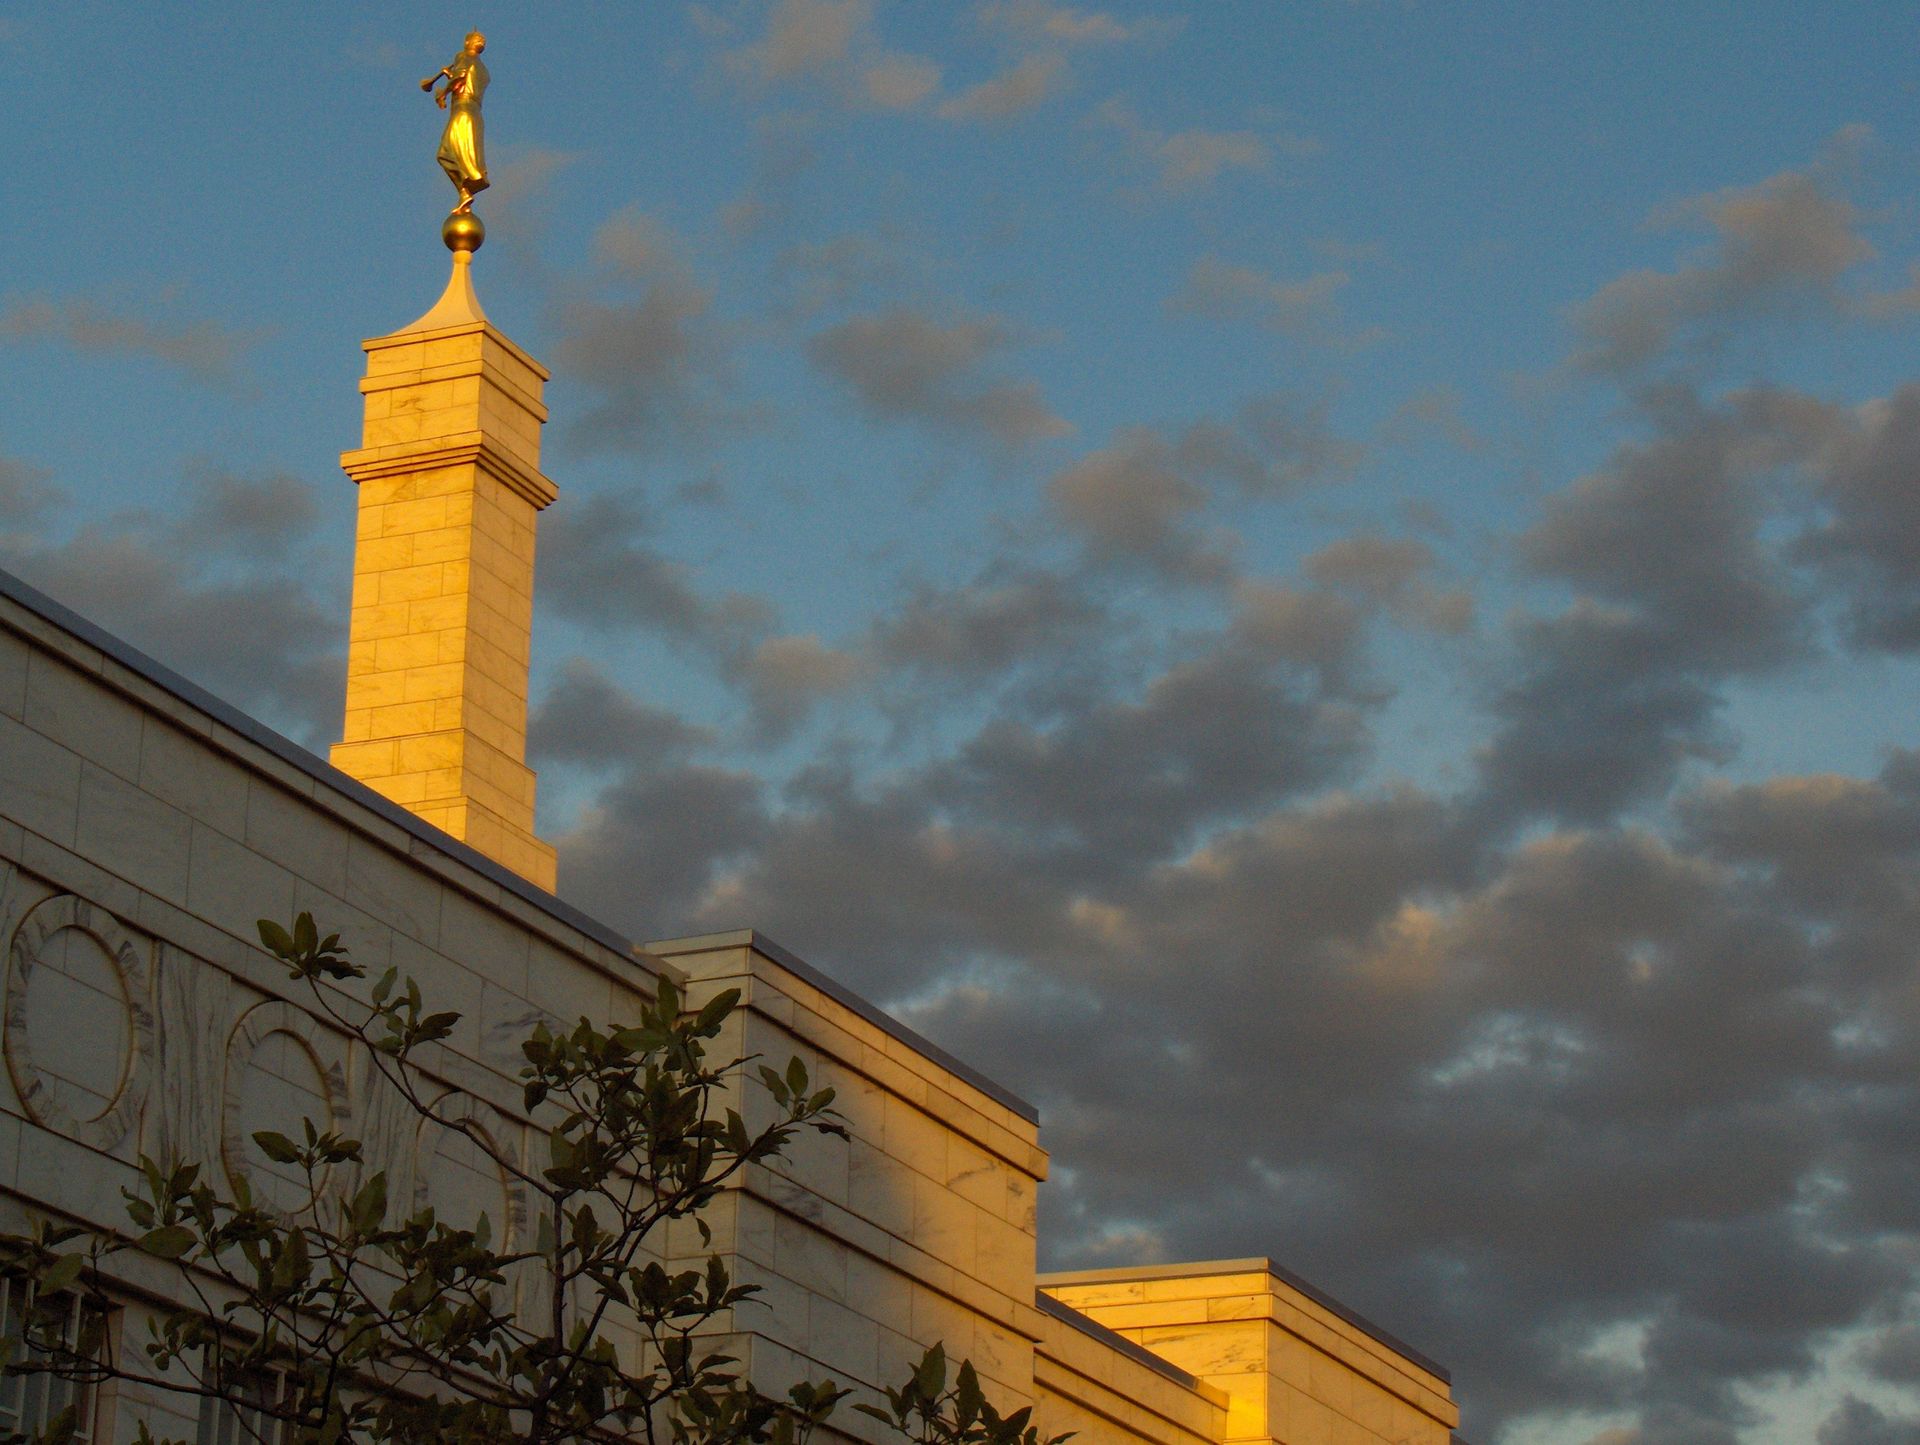 The angel Moroni on the Columbus Ohio Temple spire in the evening.